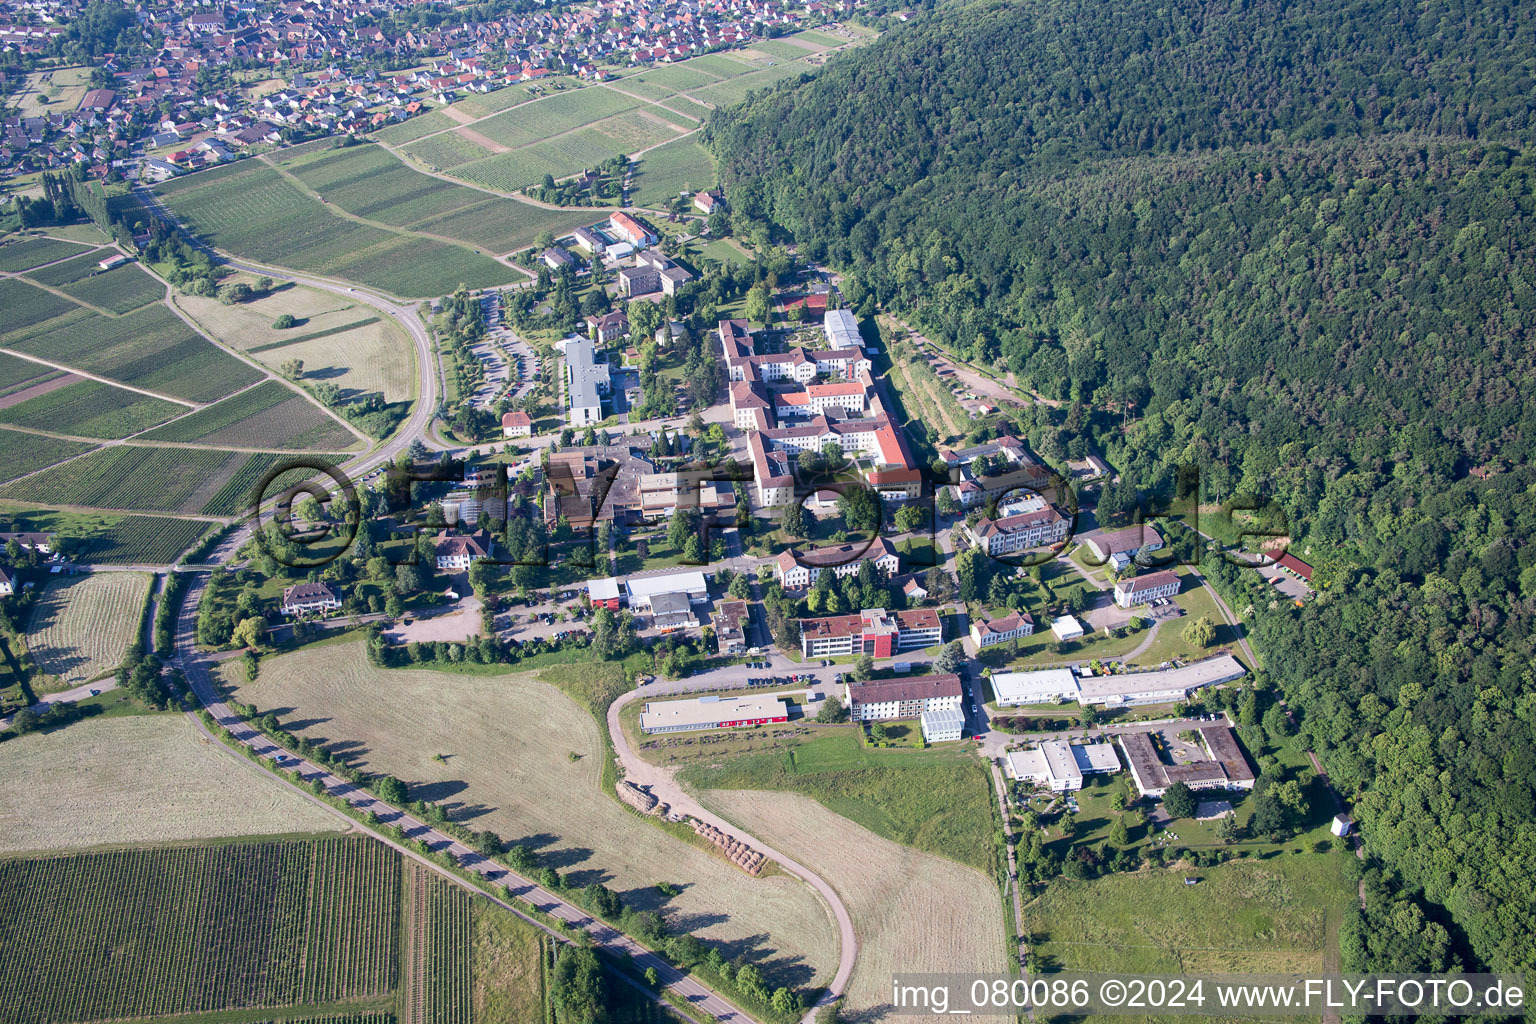 Klingenmünster in the state Rhineland-Palatinate, Germany from above